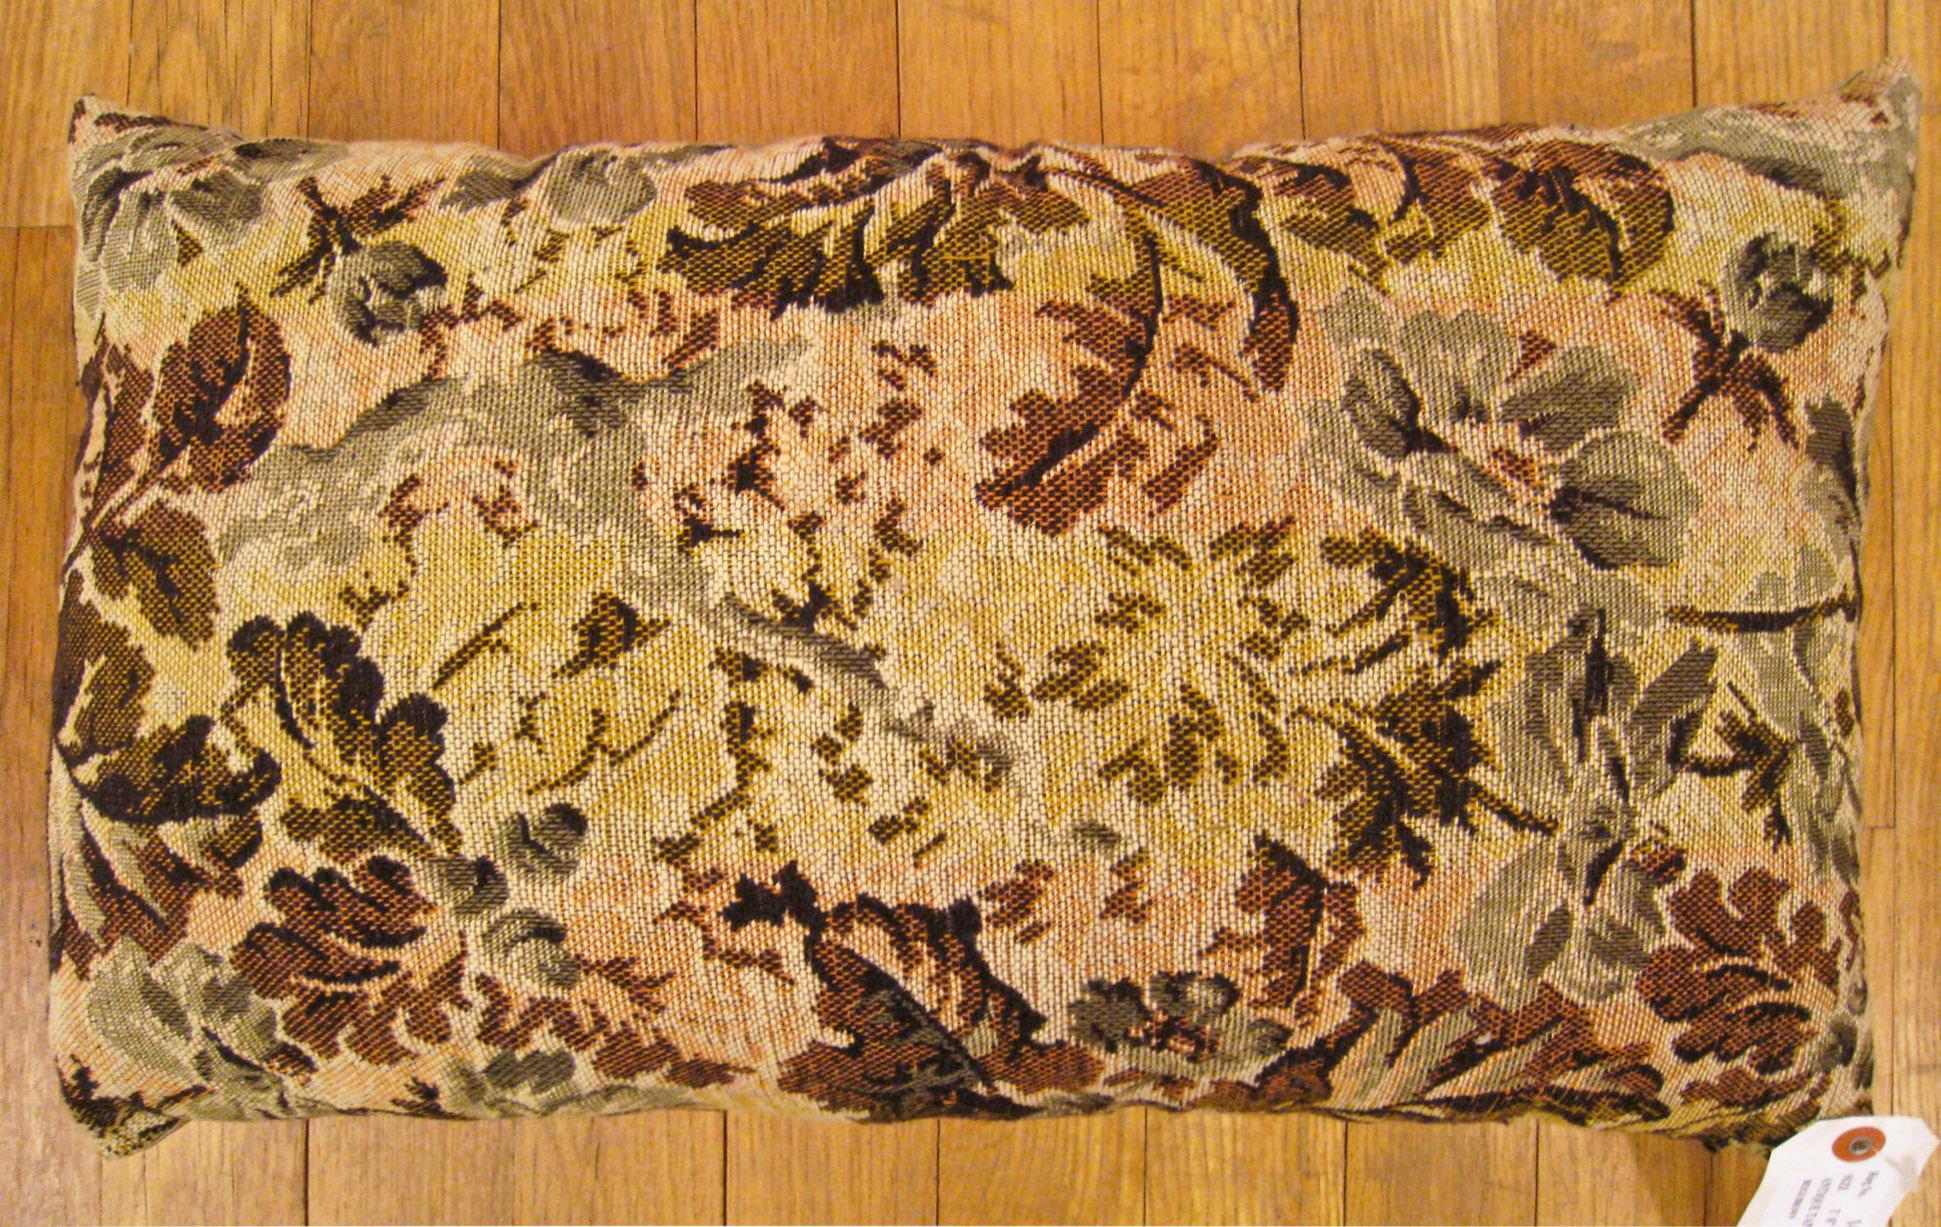 Antique Jacquard Tapestry Pillow; size 1'0” x 1'8”. 

An antique decorative pillow with floral elements allover a light shrimp central field, size 1'0